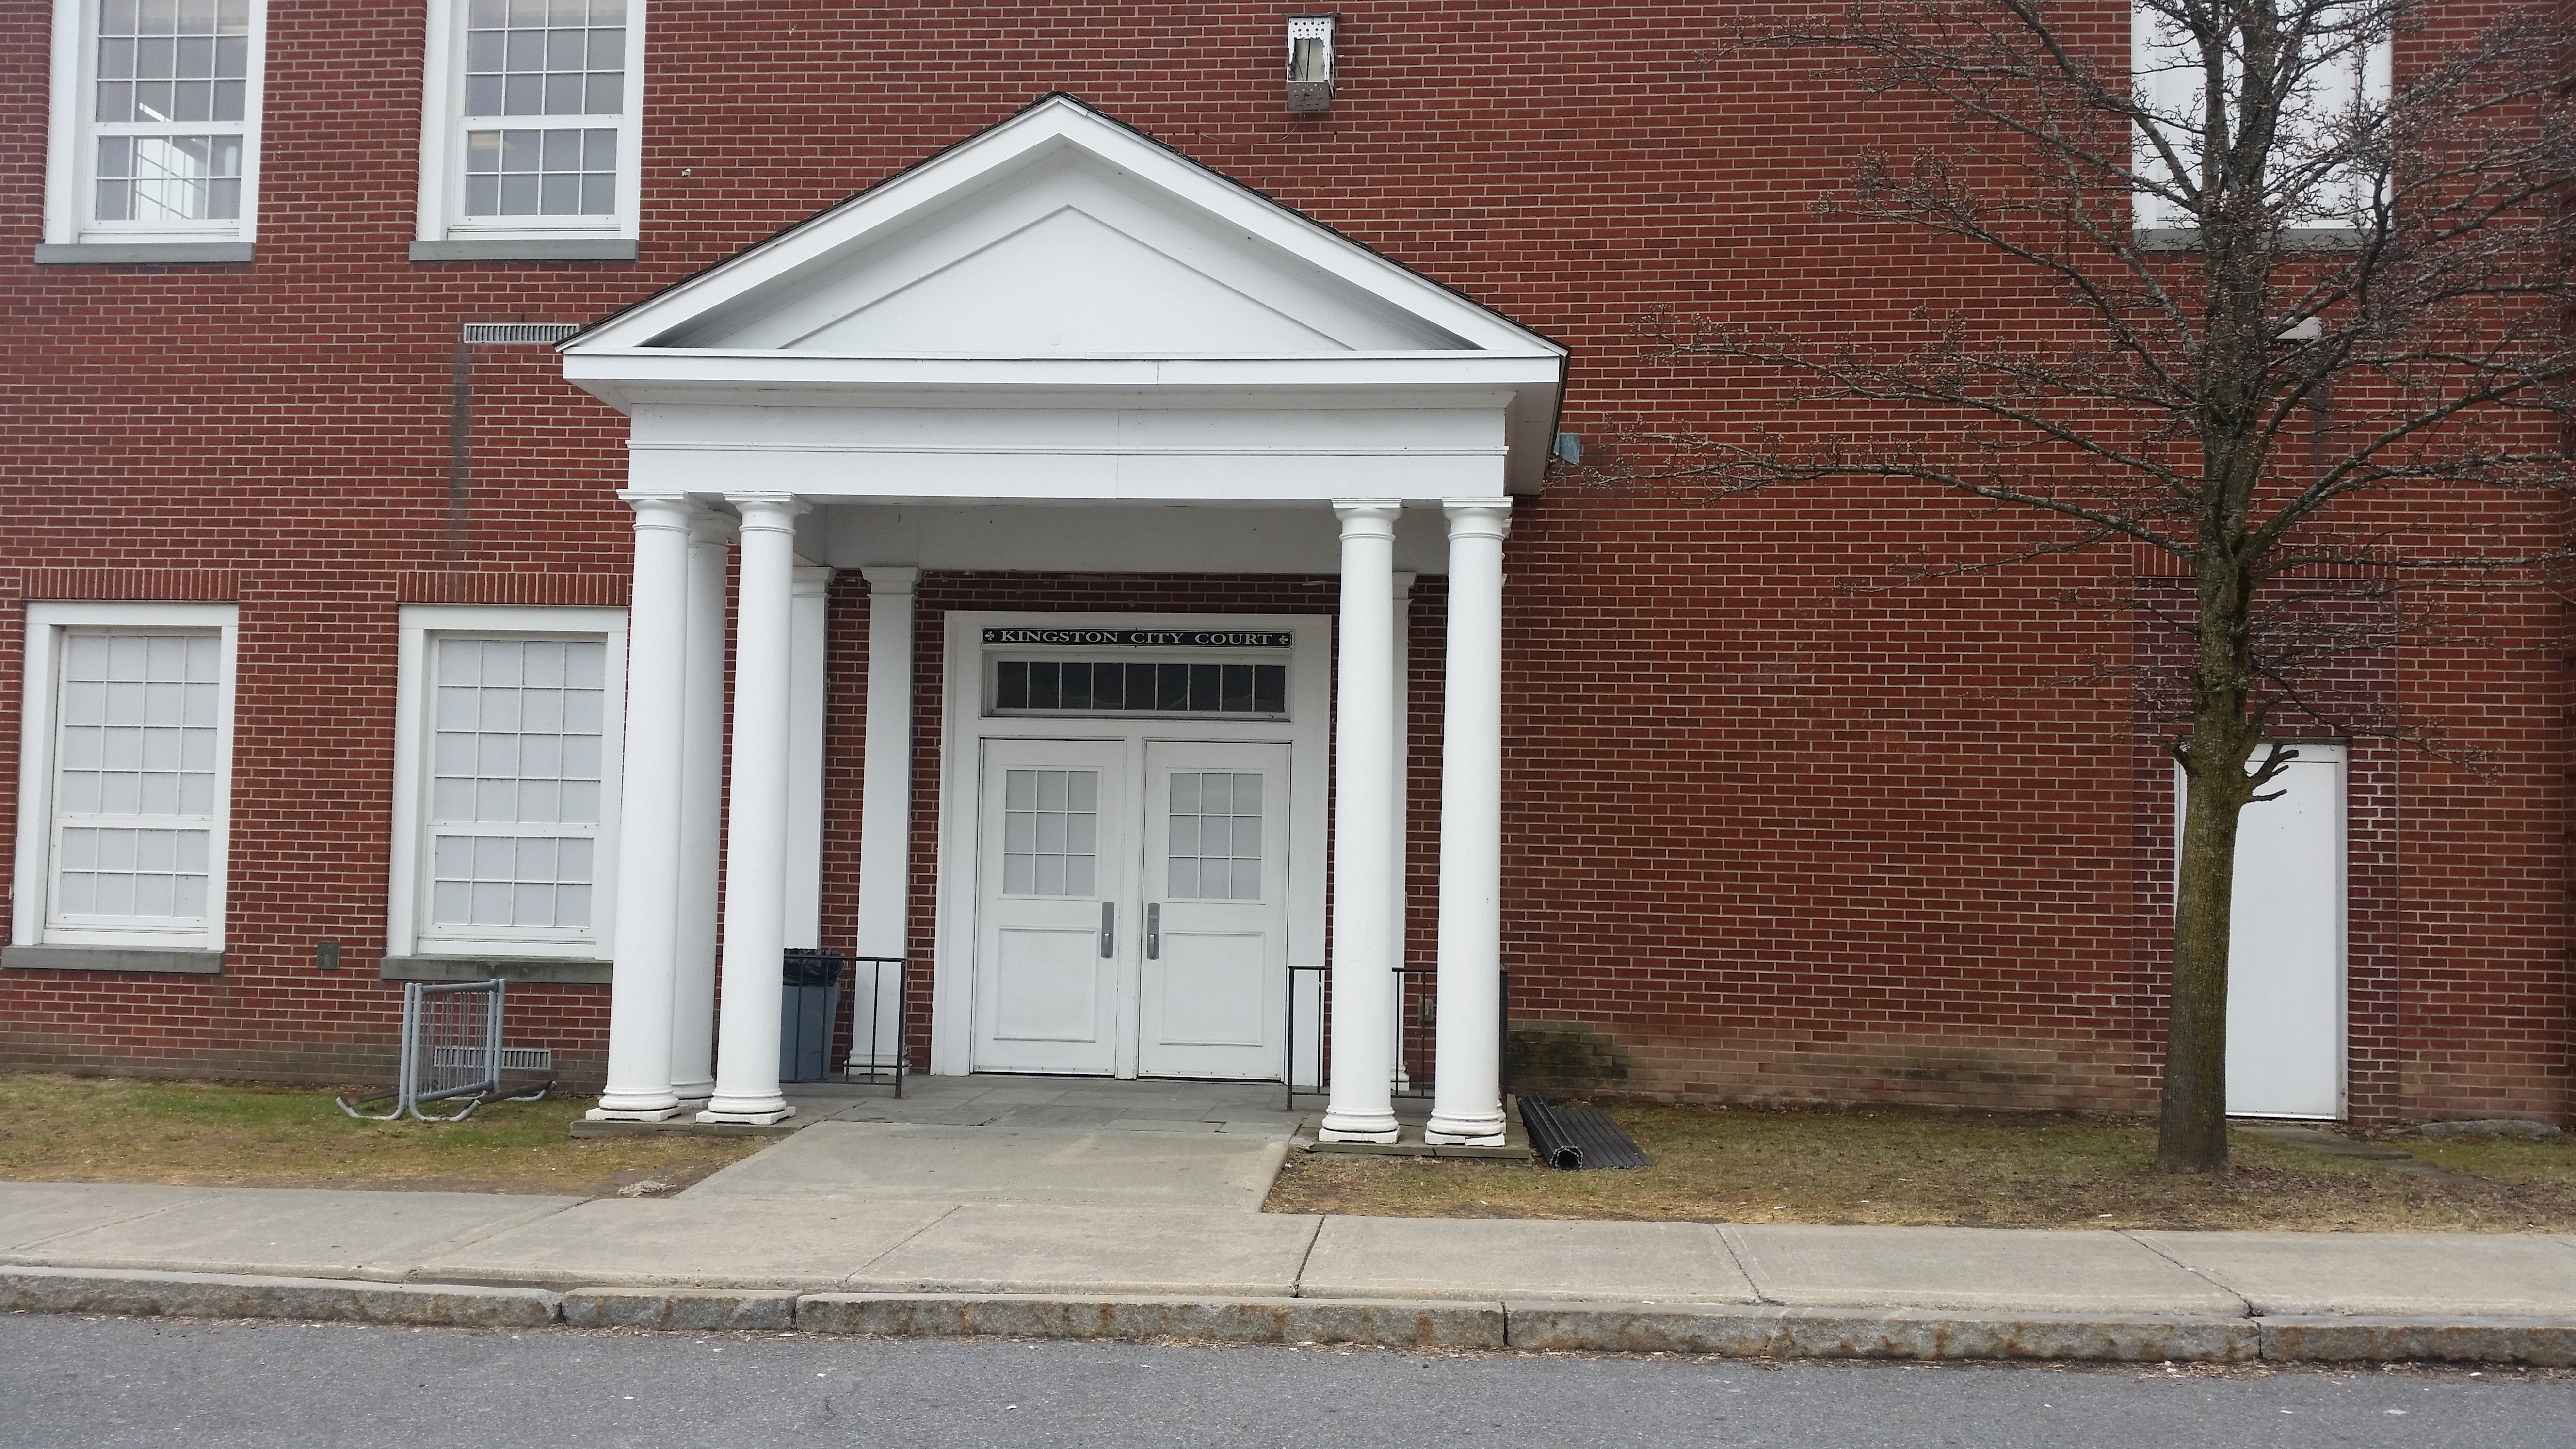 This is the entrance to the Kingston City Court. There are two doors that are entered through directly from the sidewalk. The entryway is covered by a peaked area held up by large columns.